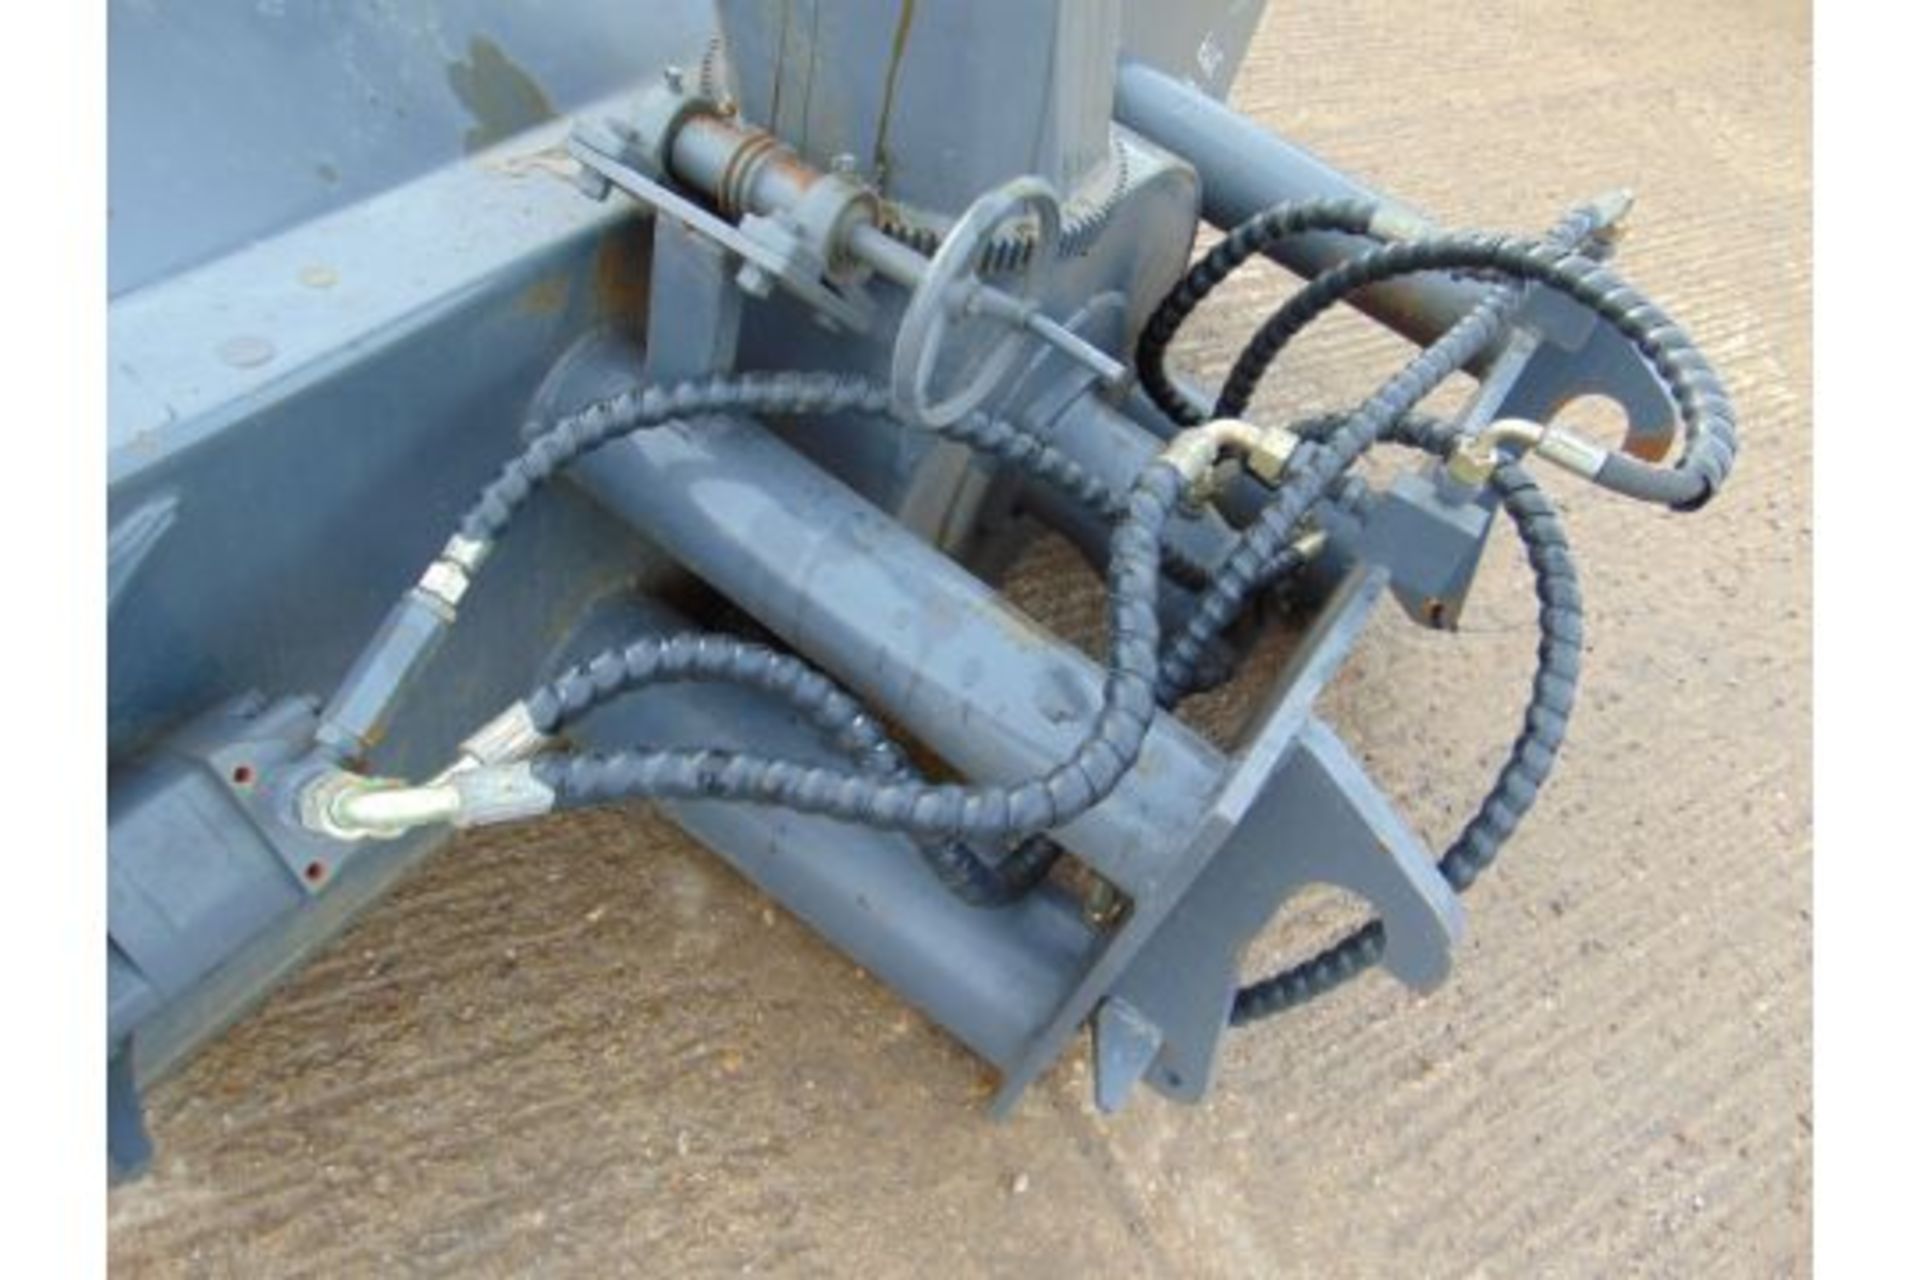 Unissued Hydraulic Snow Blower for Wheel Loader, Telehandler, Forklift, tractor Etc - Image 6 of 10